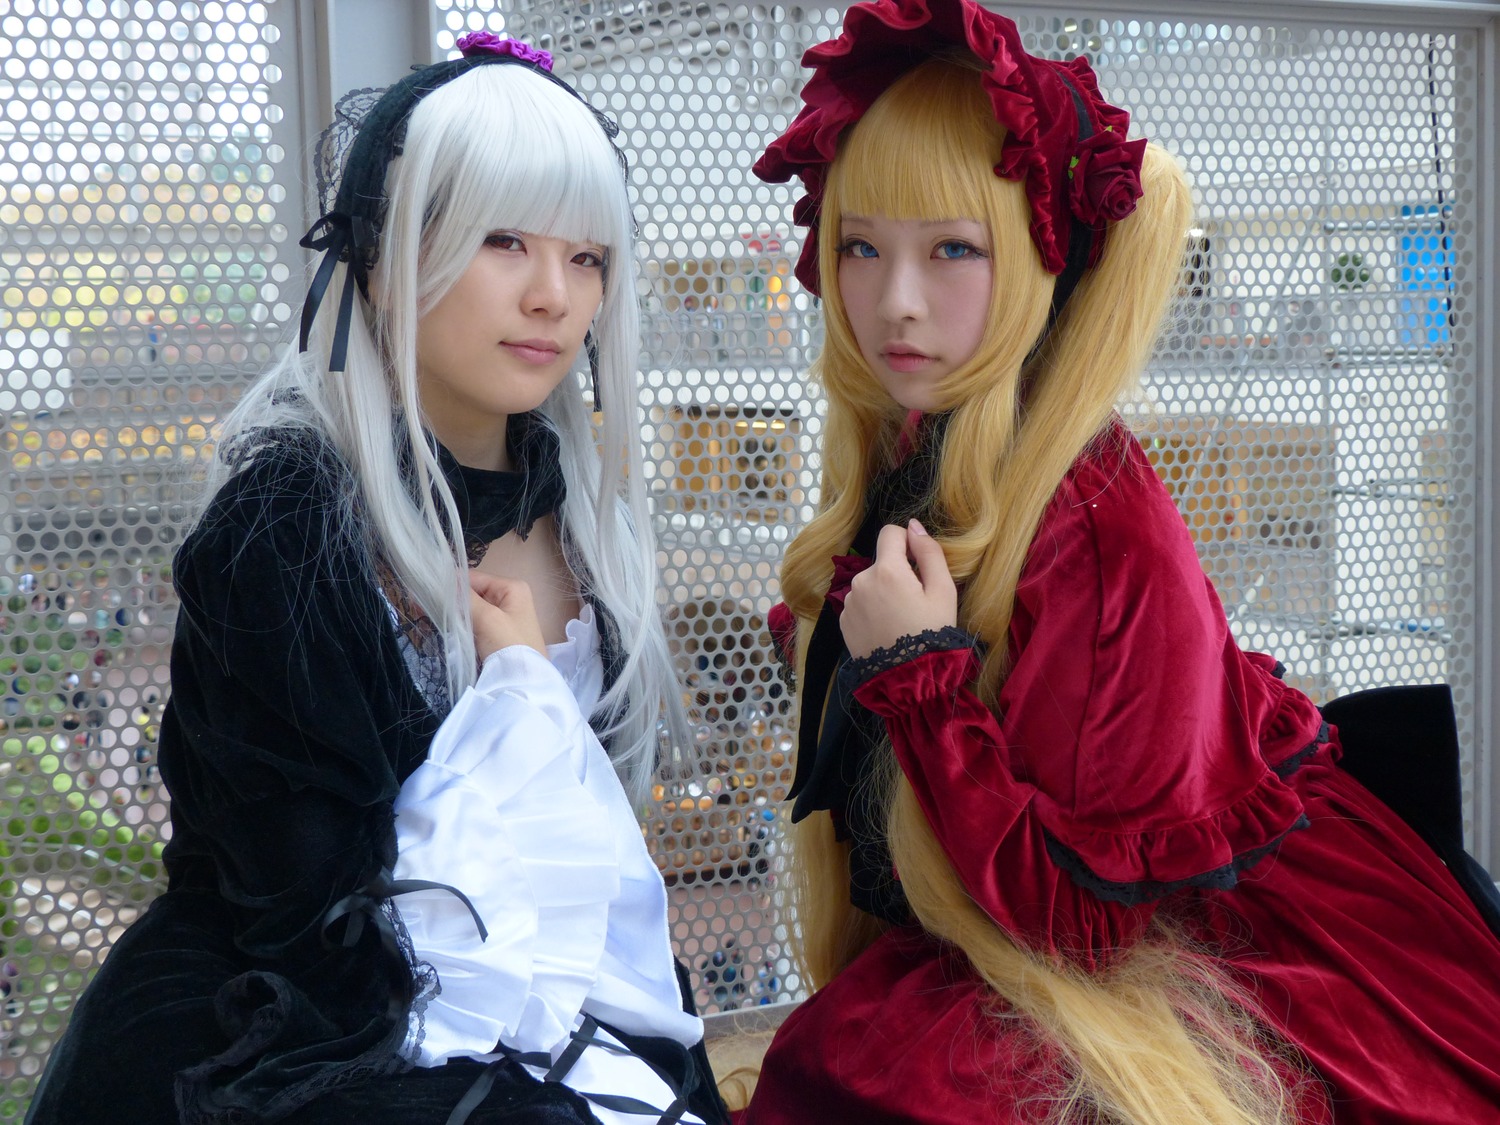 2girls bangs blonde_hair blue_eyes bonnet chain-link_fence dress fence flower frills hime_cut lips lolita_fashion long_hair long_sleeves looking_at_viewer multiple_cosplay multiple_girls photo realistic red_eyes tagme